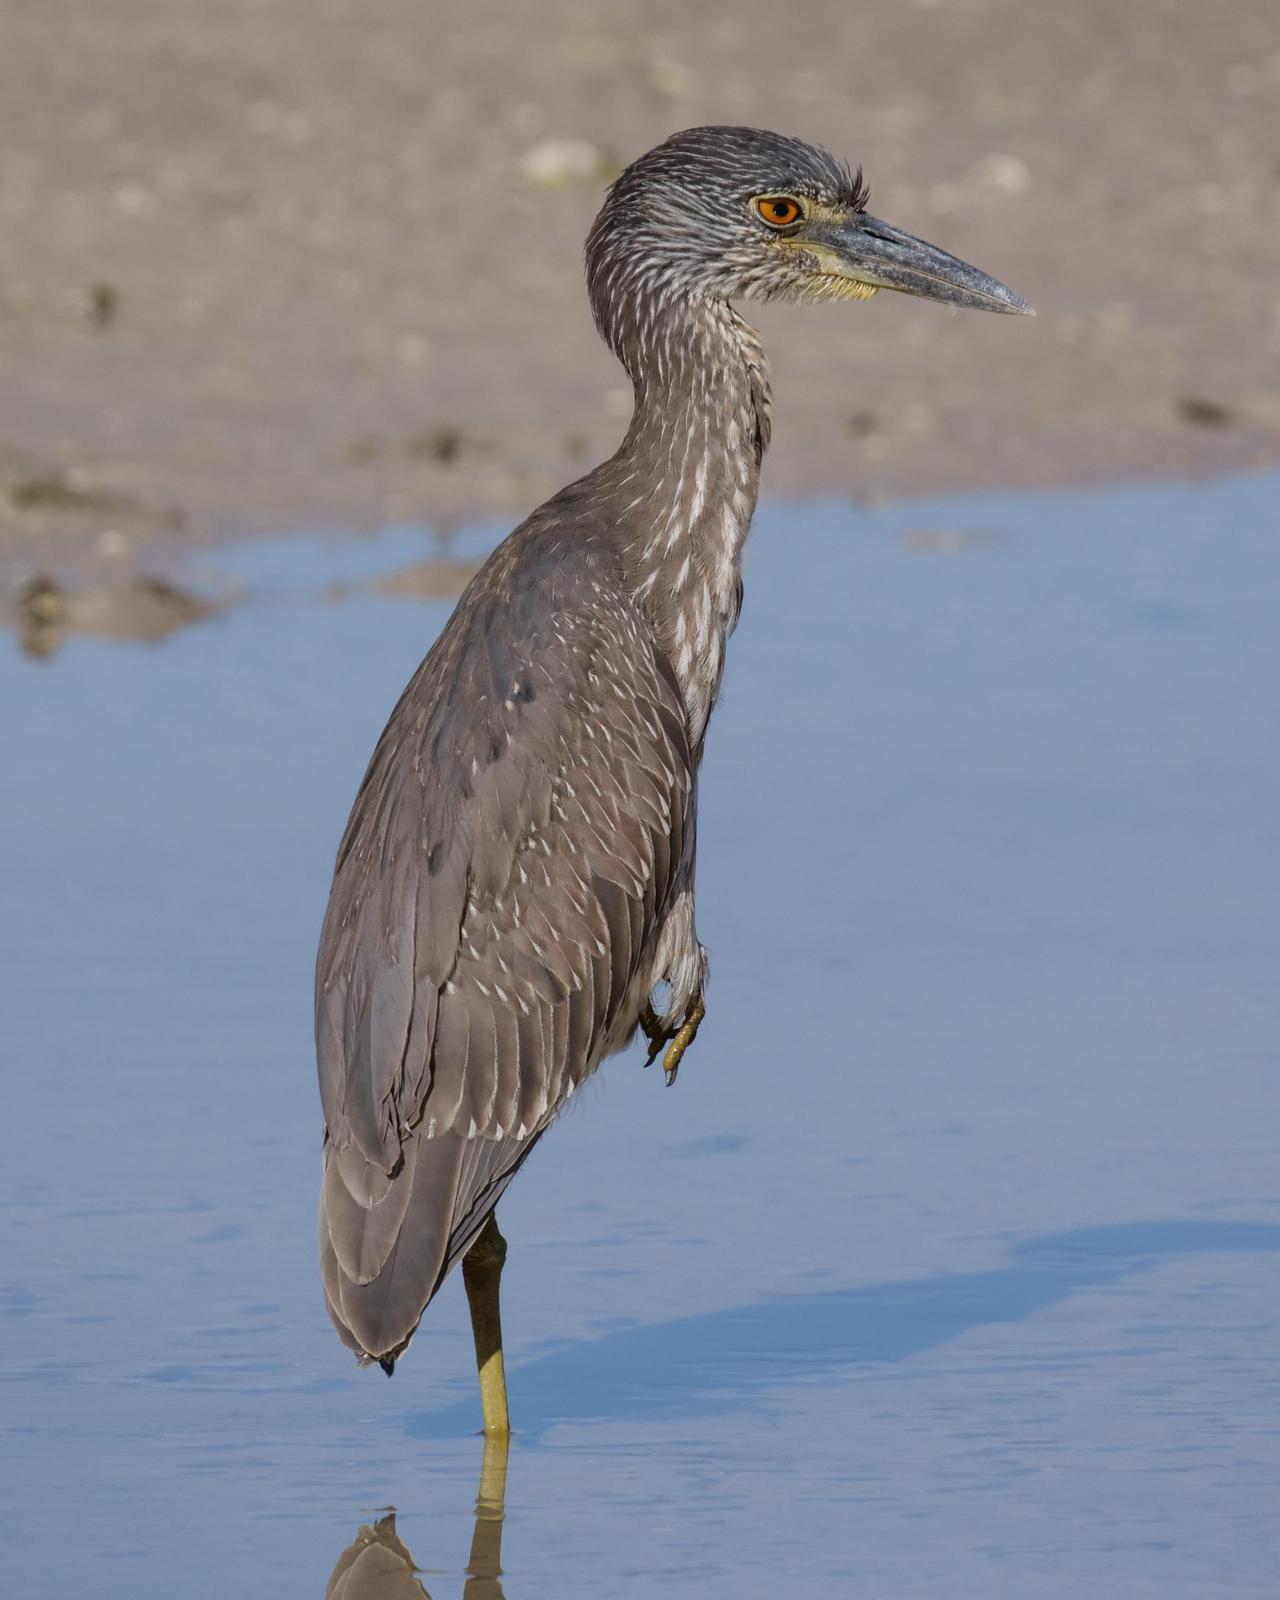 Yellow-crowned Night-Heron Photo by Steve Percival